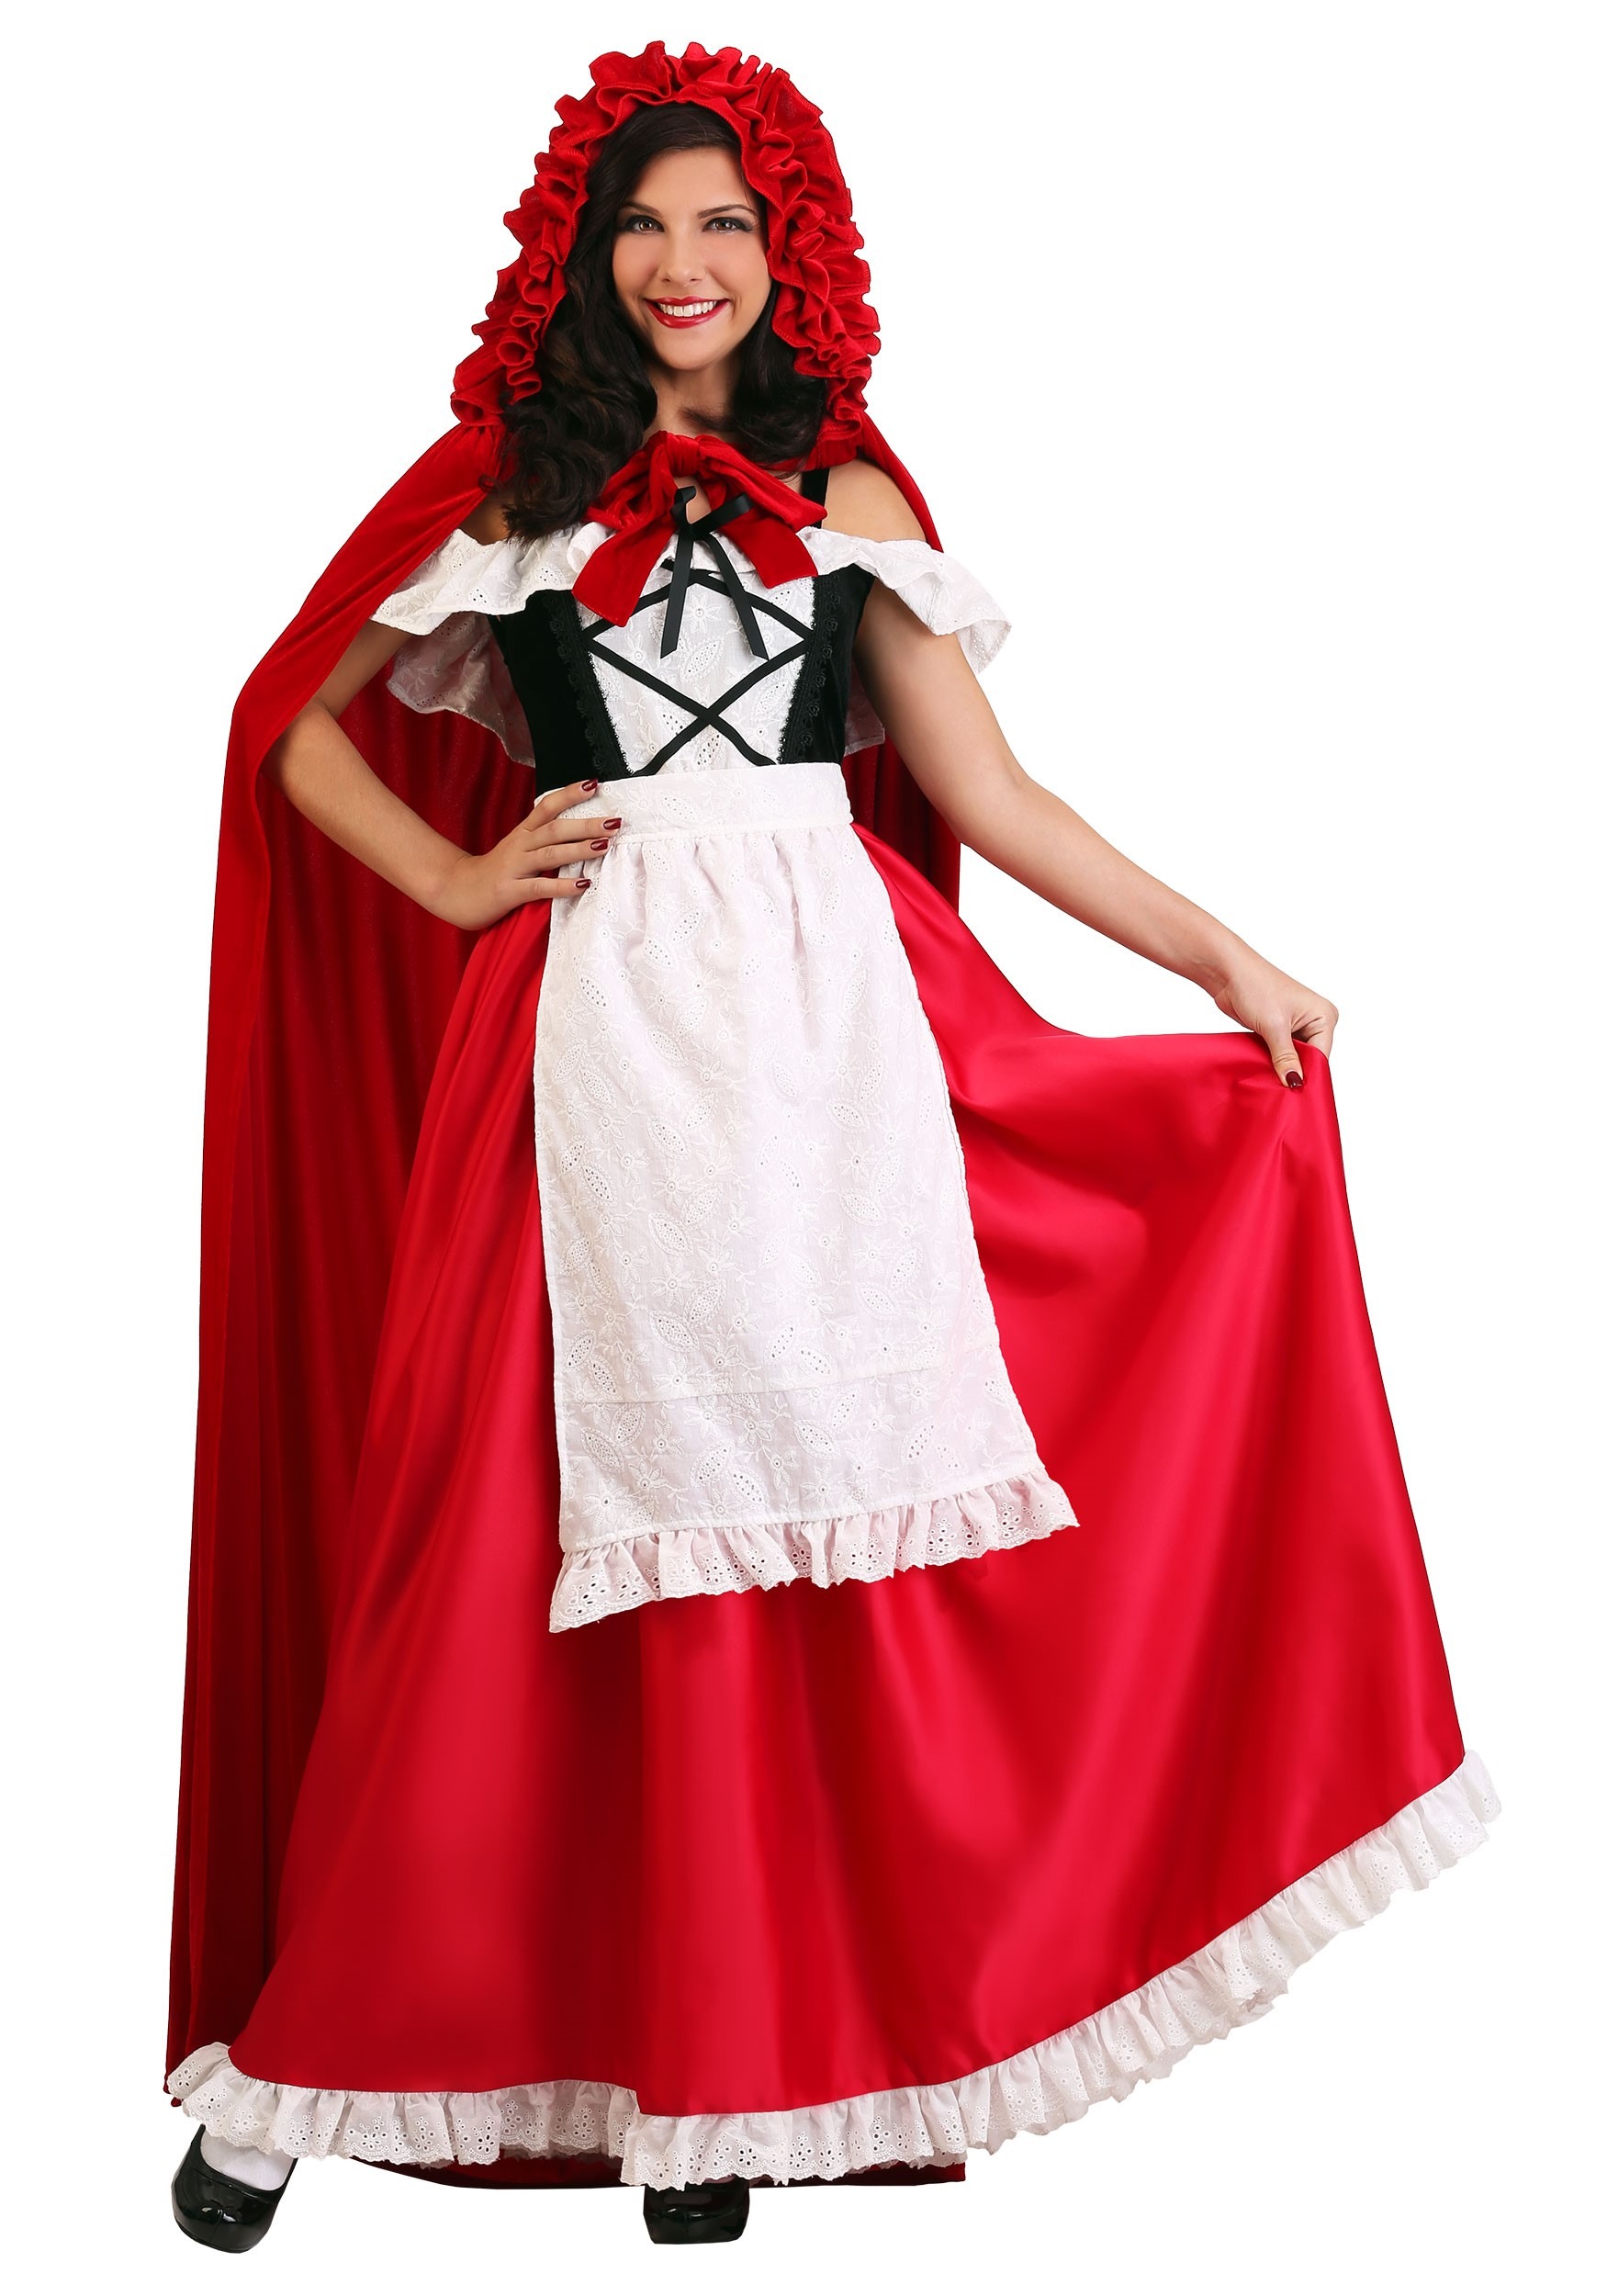 Plus Size Deluxe Red Riding Hood Fancy Dress Costume